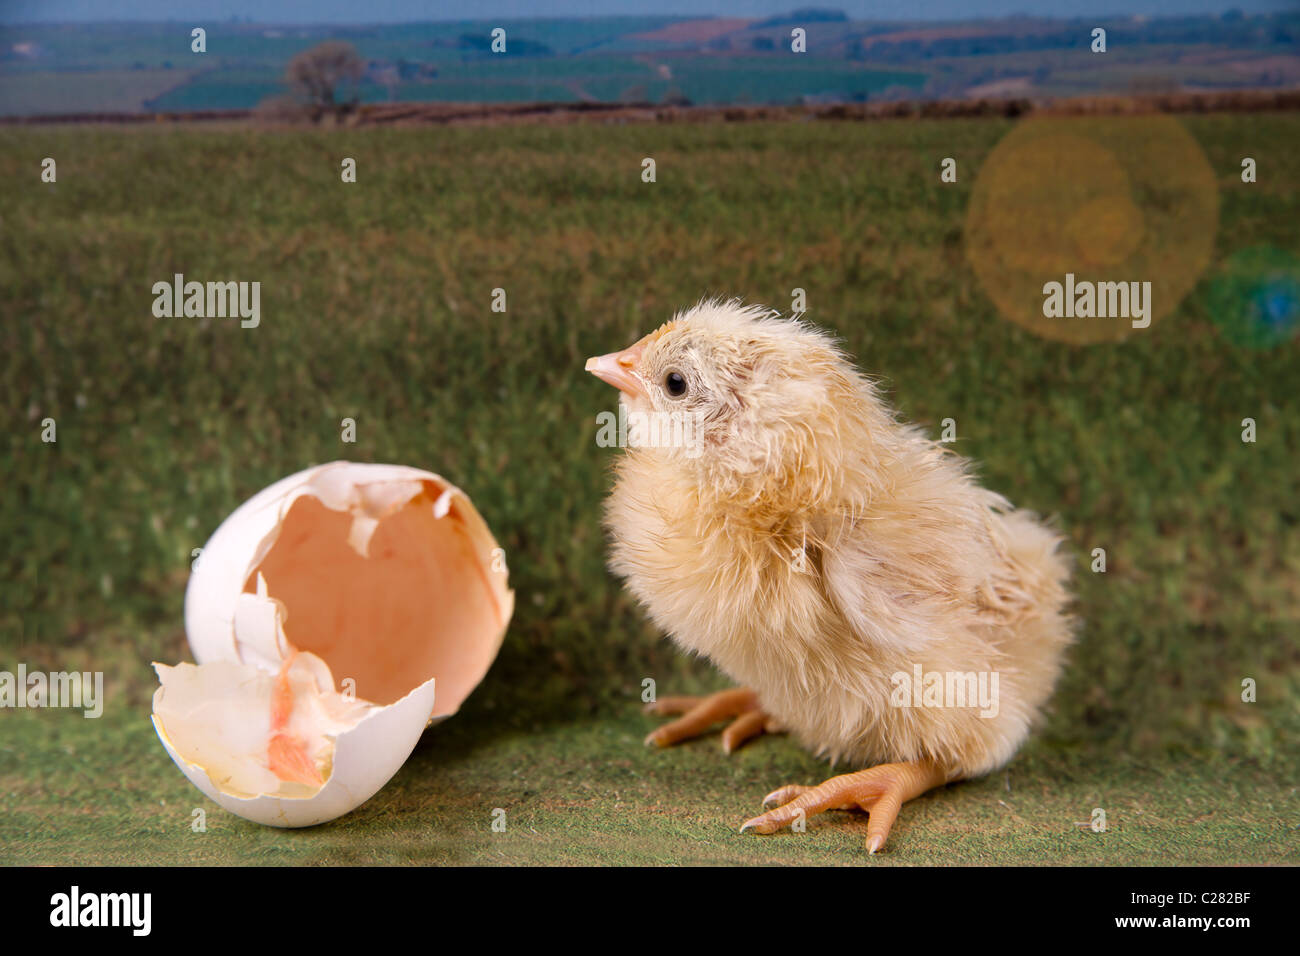 one hour old yellow chick with broken egg shell against a countryside landscape Stock Photo